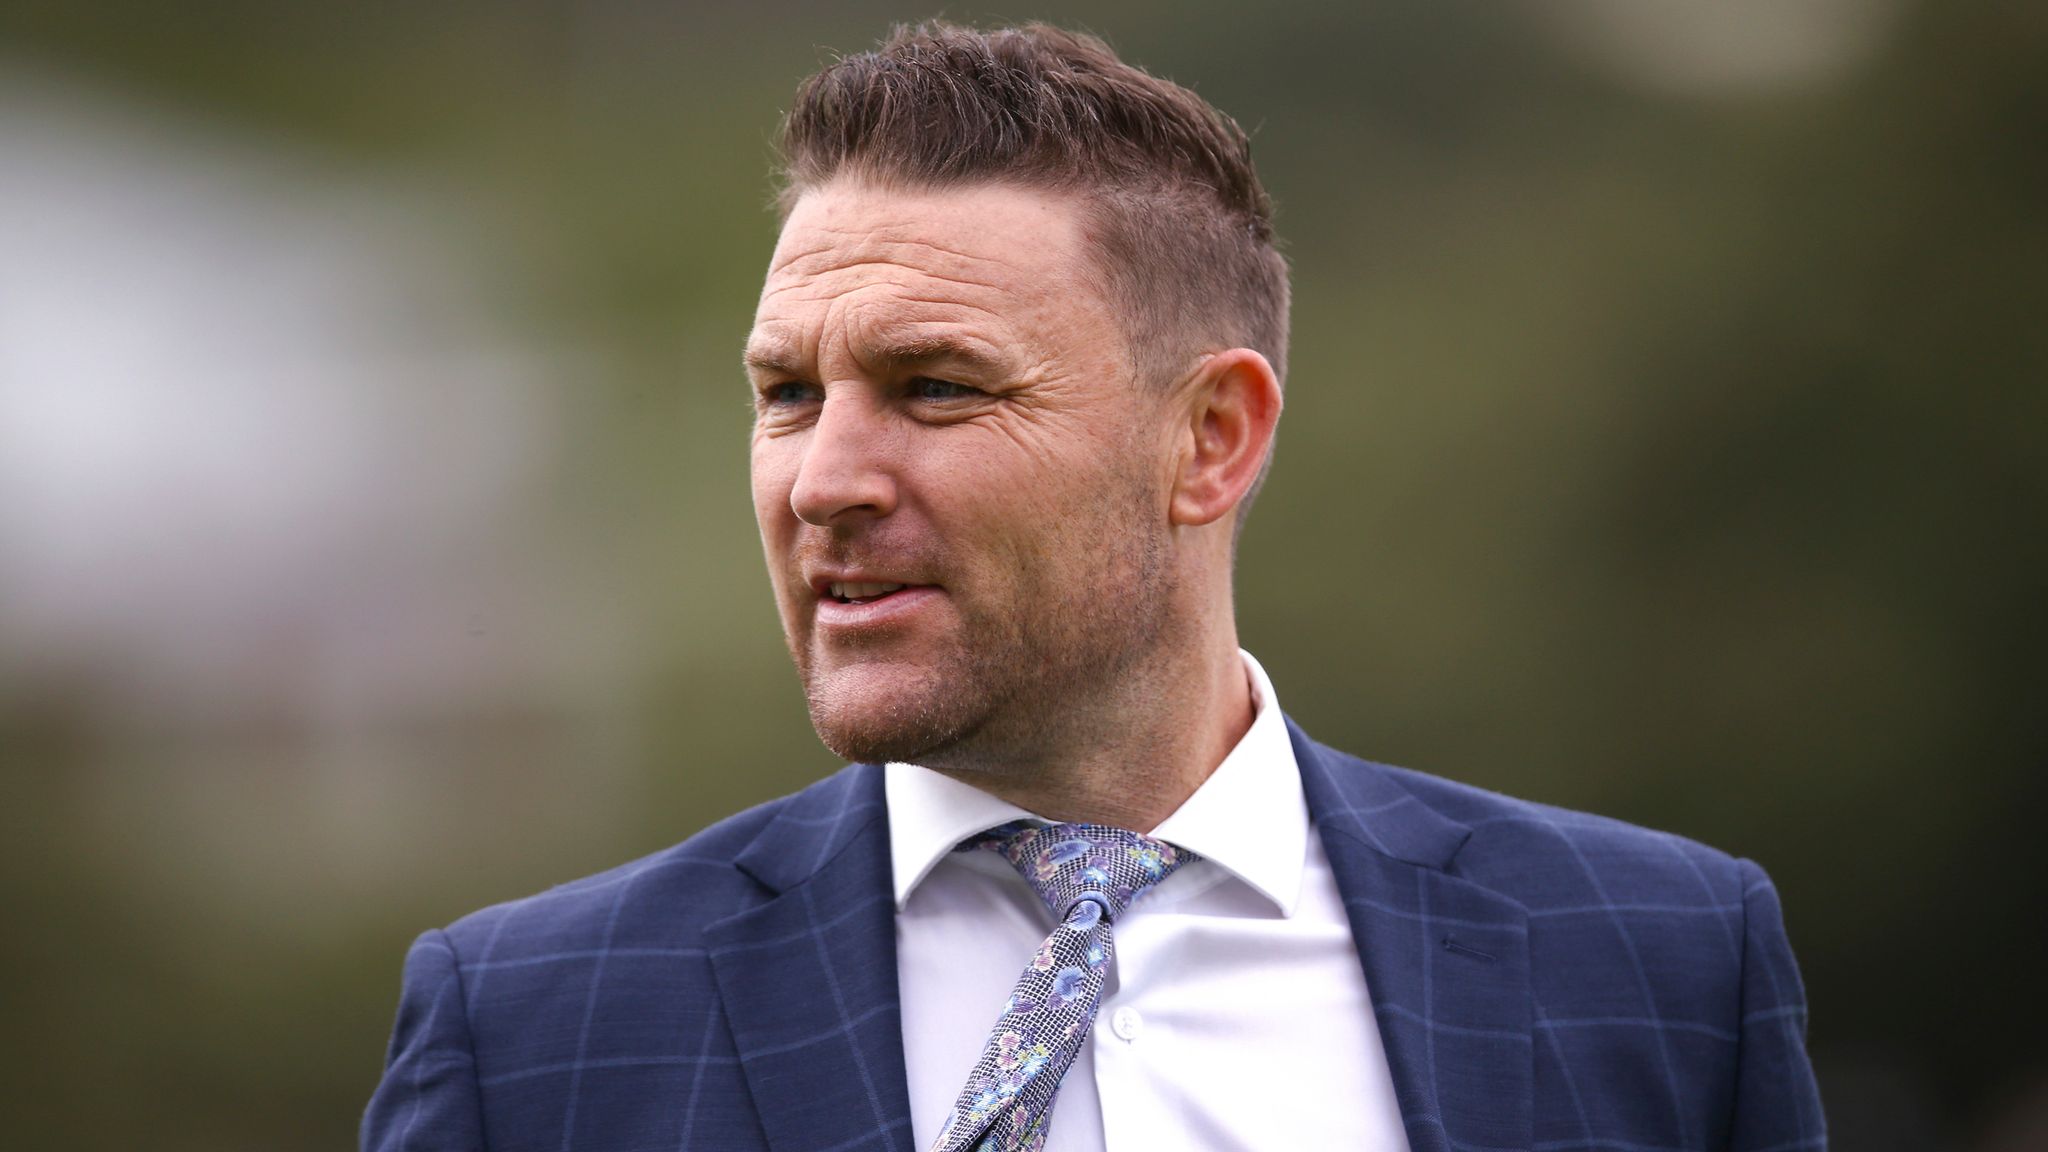 IPL 2022: Brendon McCullum Starts Senseless Cricket In The Garb Of Fearless Cricket At Times – Salman Butt Lashes Out At KKR Head Coach